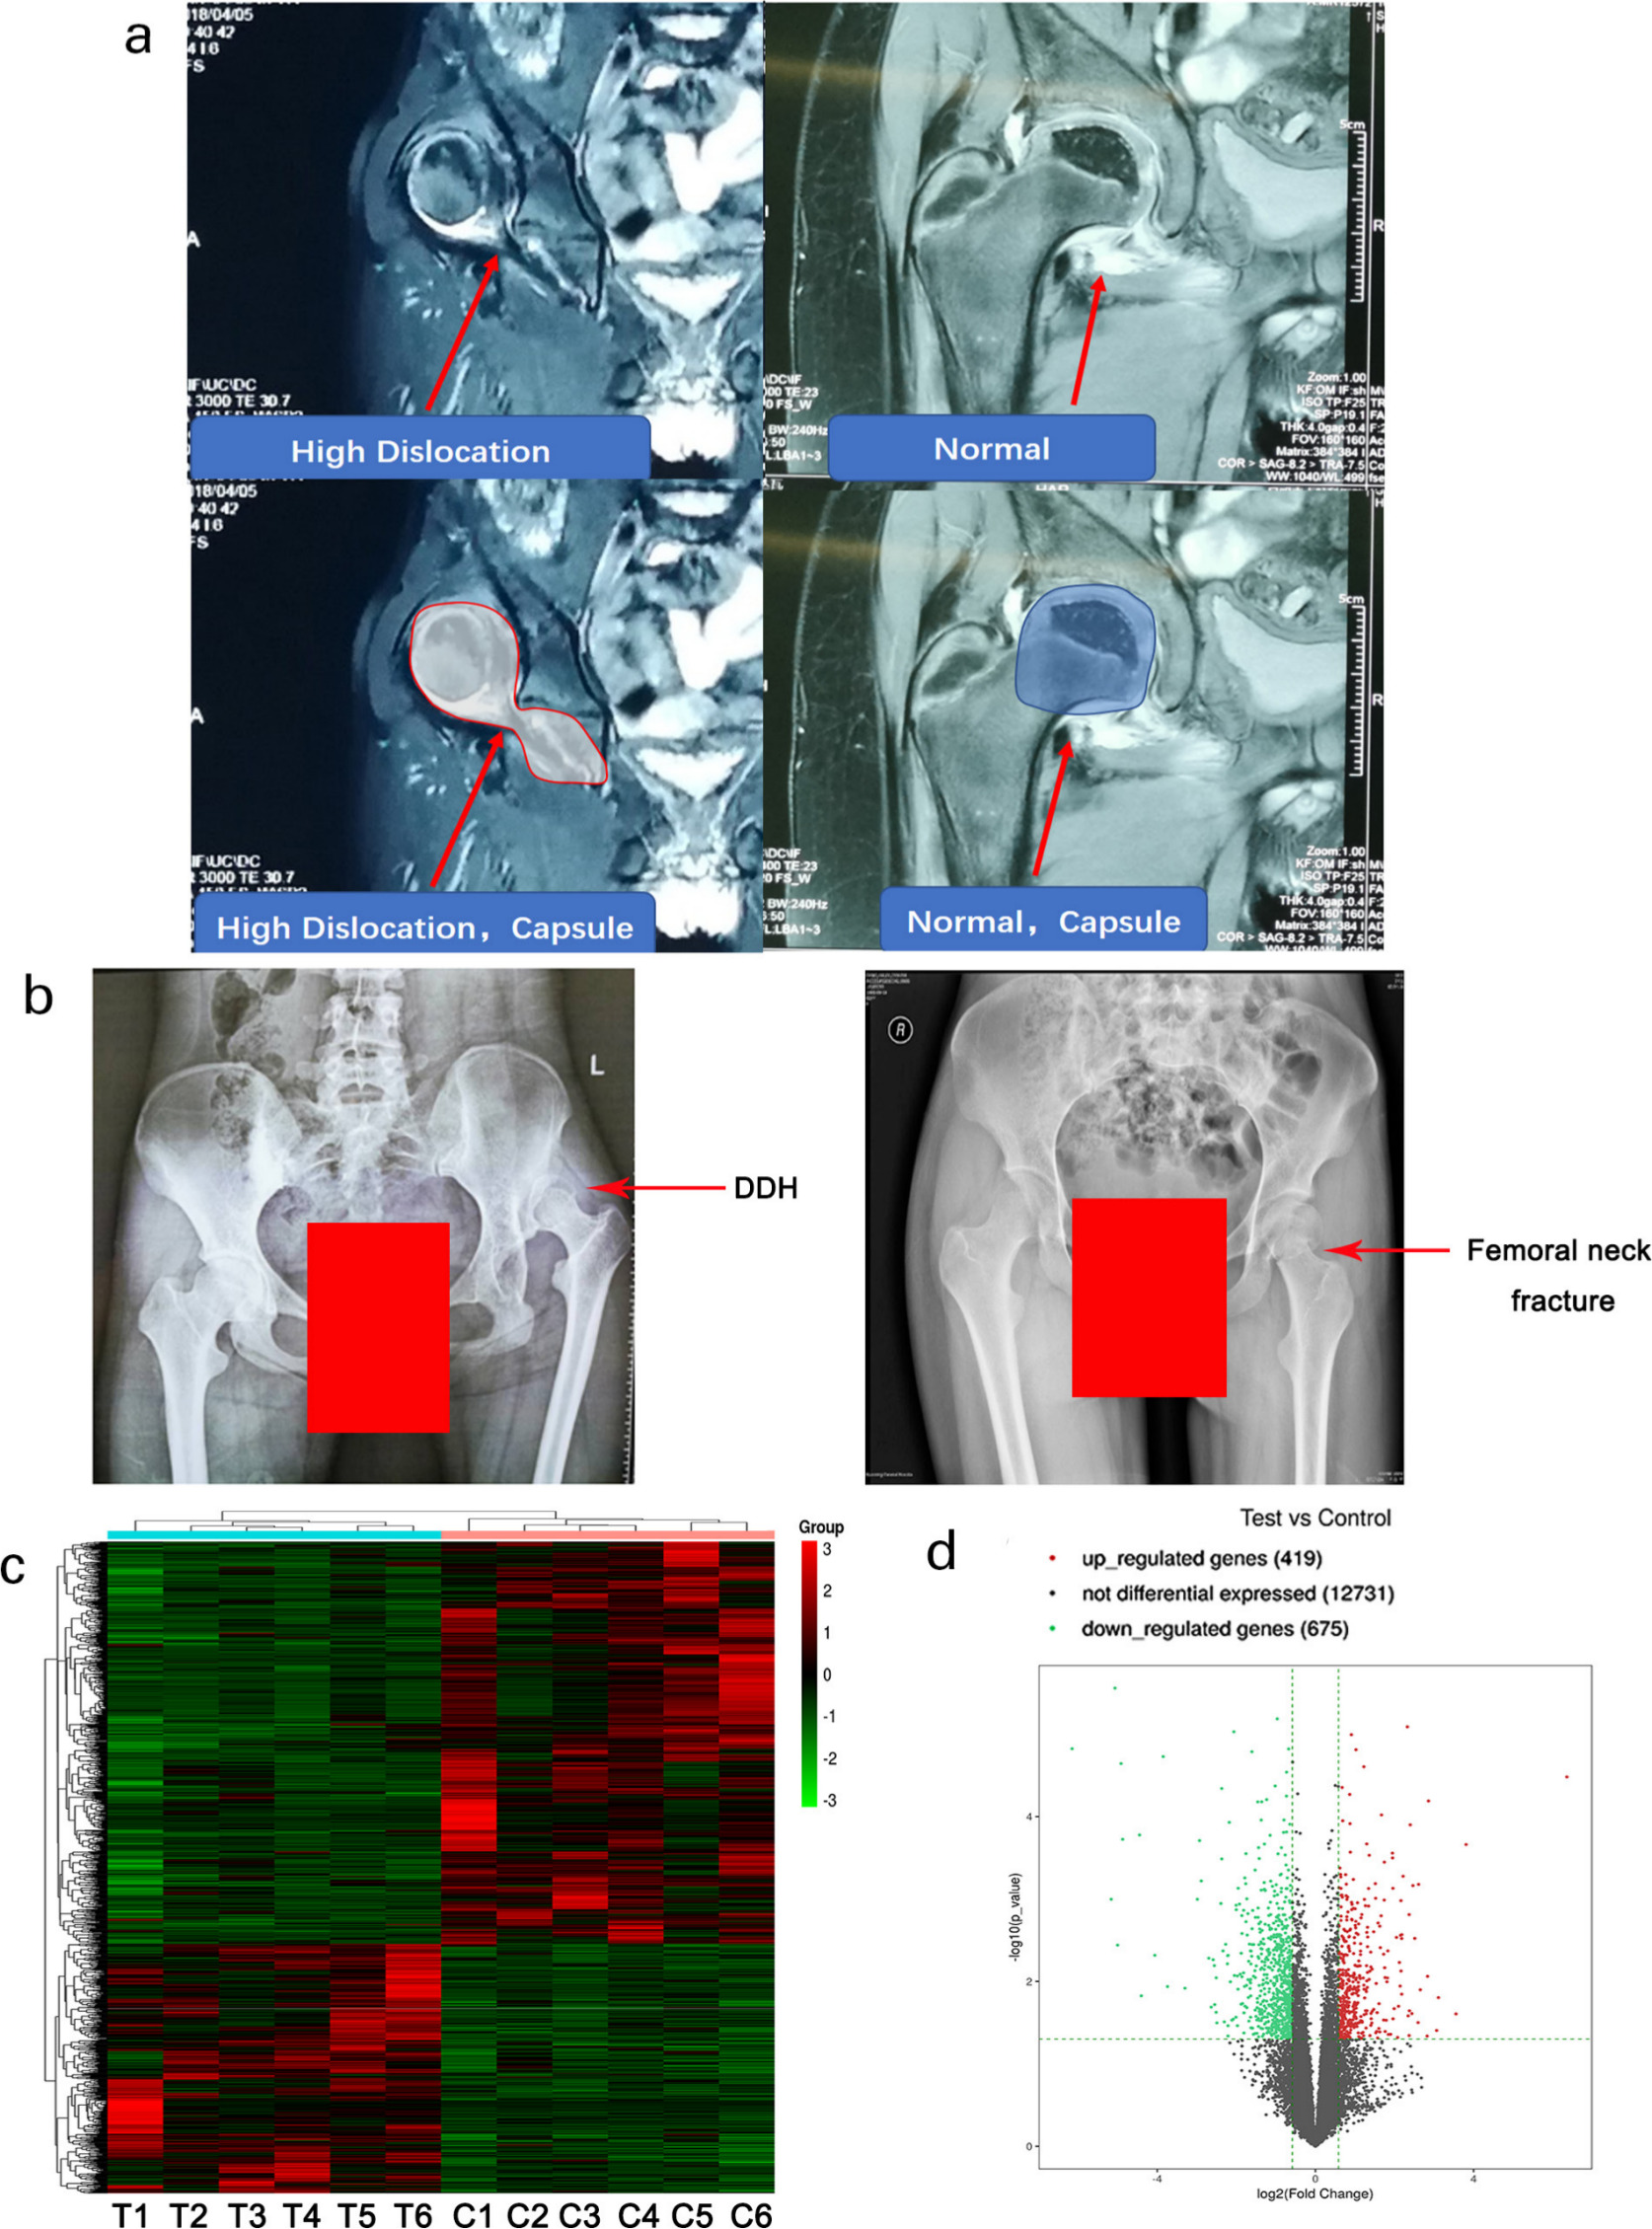 Fig. 1 
            High-throughput sequencing assay reveals genes differentially expressed in hip joint capsules between healthy control and developmental dysplasia of the hip (DDH). Tissues from the hip joint capsule of patients with DDH (n = 6) and healthy controls (n = 6) were used for the high-throughput sequencing assay. Control subjects are enrolled from patients with femoral neck fracture. Despite the femoral neck fracture, the controls had no symptoms or history of congenital dislocation of the hip and other diseases. a) Nuclear magnetic resonance and b) radiograph detection were used for the diagnosis of DDH. c) Gene expression levels are shown in a heat map, in which each row represents a gene and each column represents a sample of hip joint capsule tissue. The variation in colour from red to green represents the signal level, with red indicating high signal or upregulation, green indicating low signal or downregulation, and black representing unchanged expression. T: Test group in which the samples were obtained from patients with DDH; C: Control group in which the samples were obtained from healthy controls. d) Scatter plot showing the distribution of differentially expressed genes between healthy controls and patients with DDH. The x and y axes represent log2 (fold change) and -log10 (p-value), respectively. Red dots indicate upregulated genes and green dots indicate downregulated genes. Gray dots represent genes with no difference in expression. The dashed line defines the up- and downregulation boundaries (p < 0.05 and log2 (fold changes) > 1 or log2 (fold changes) < -1).
          